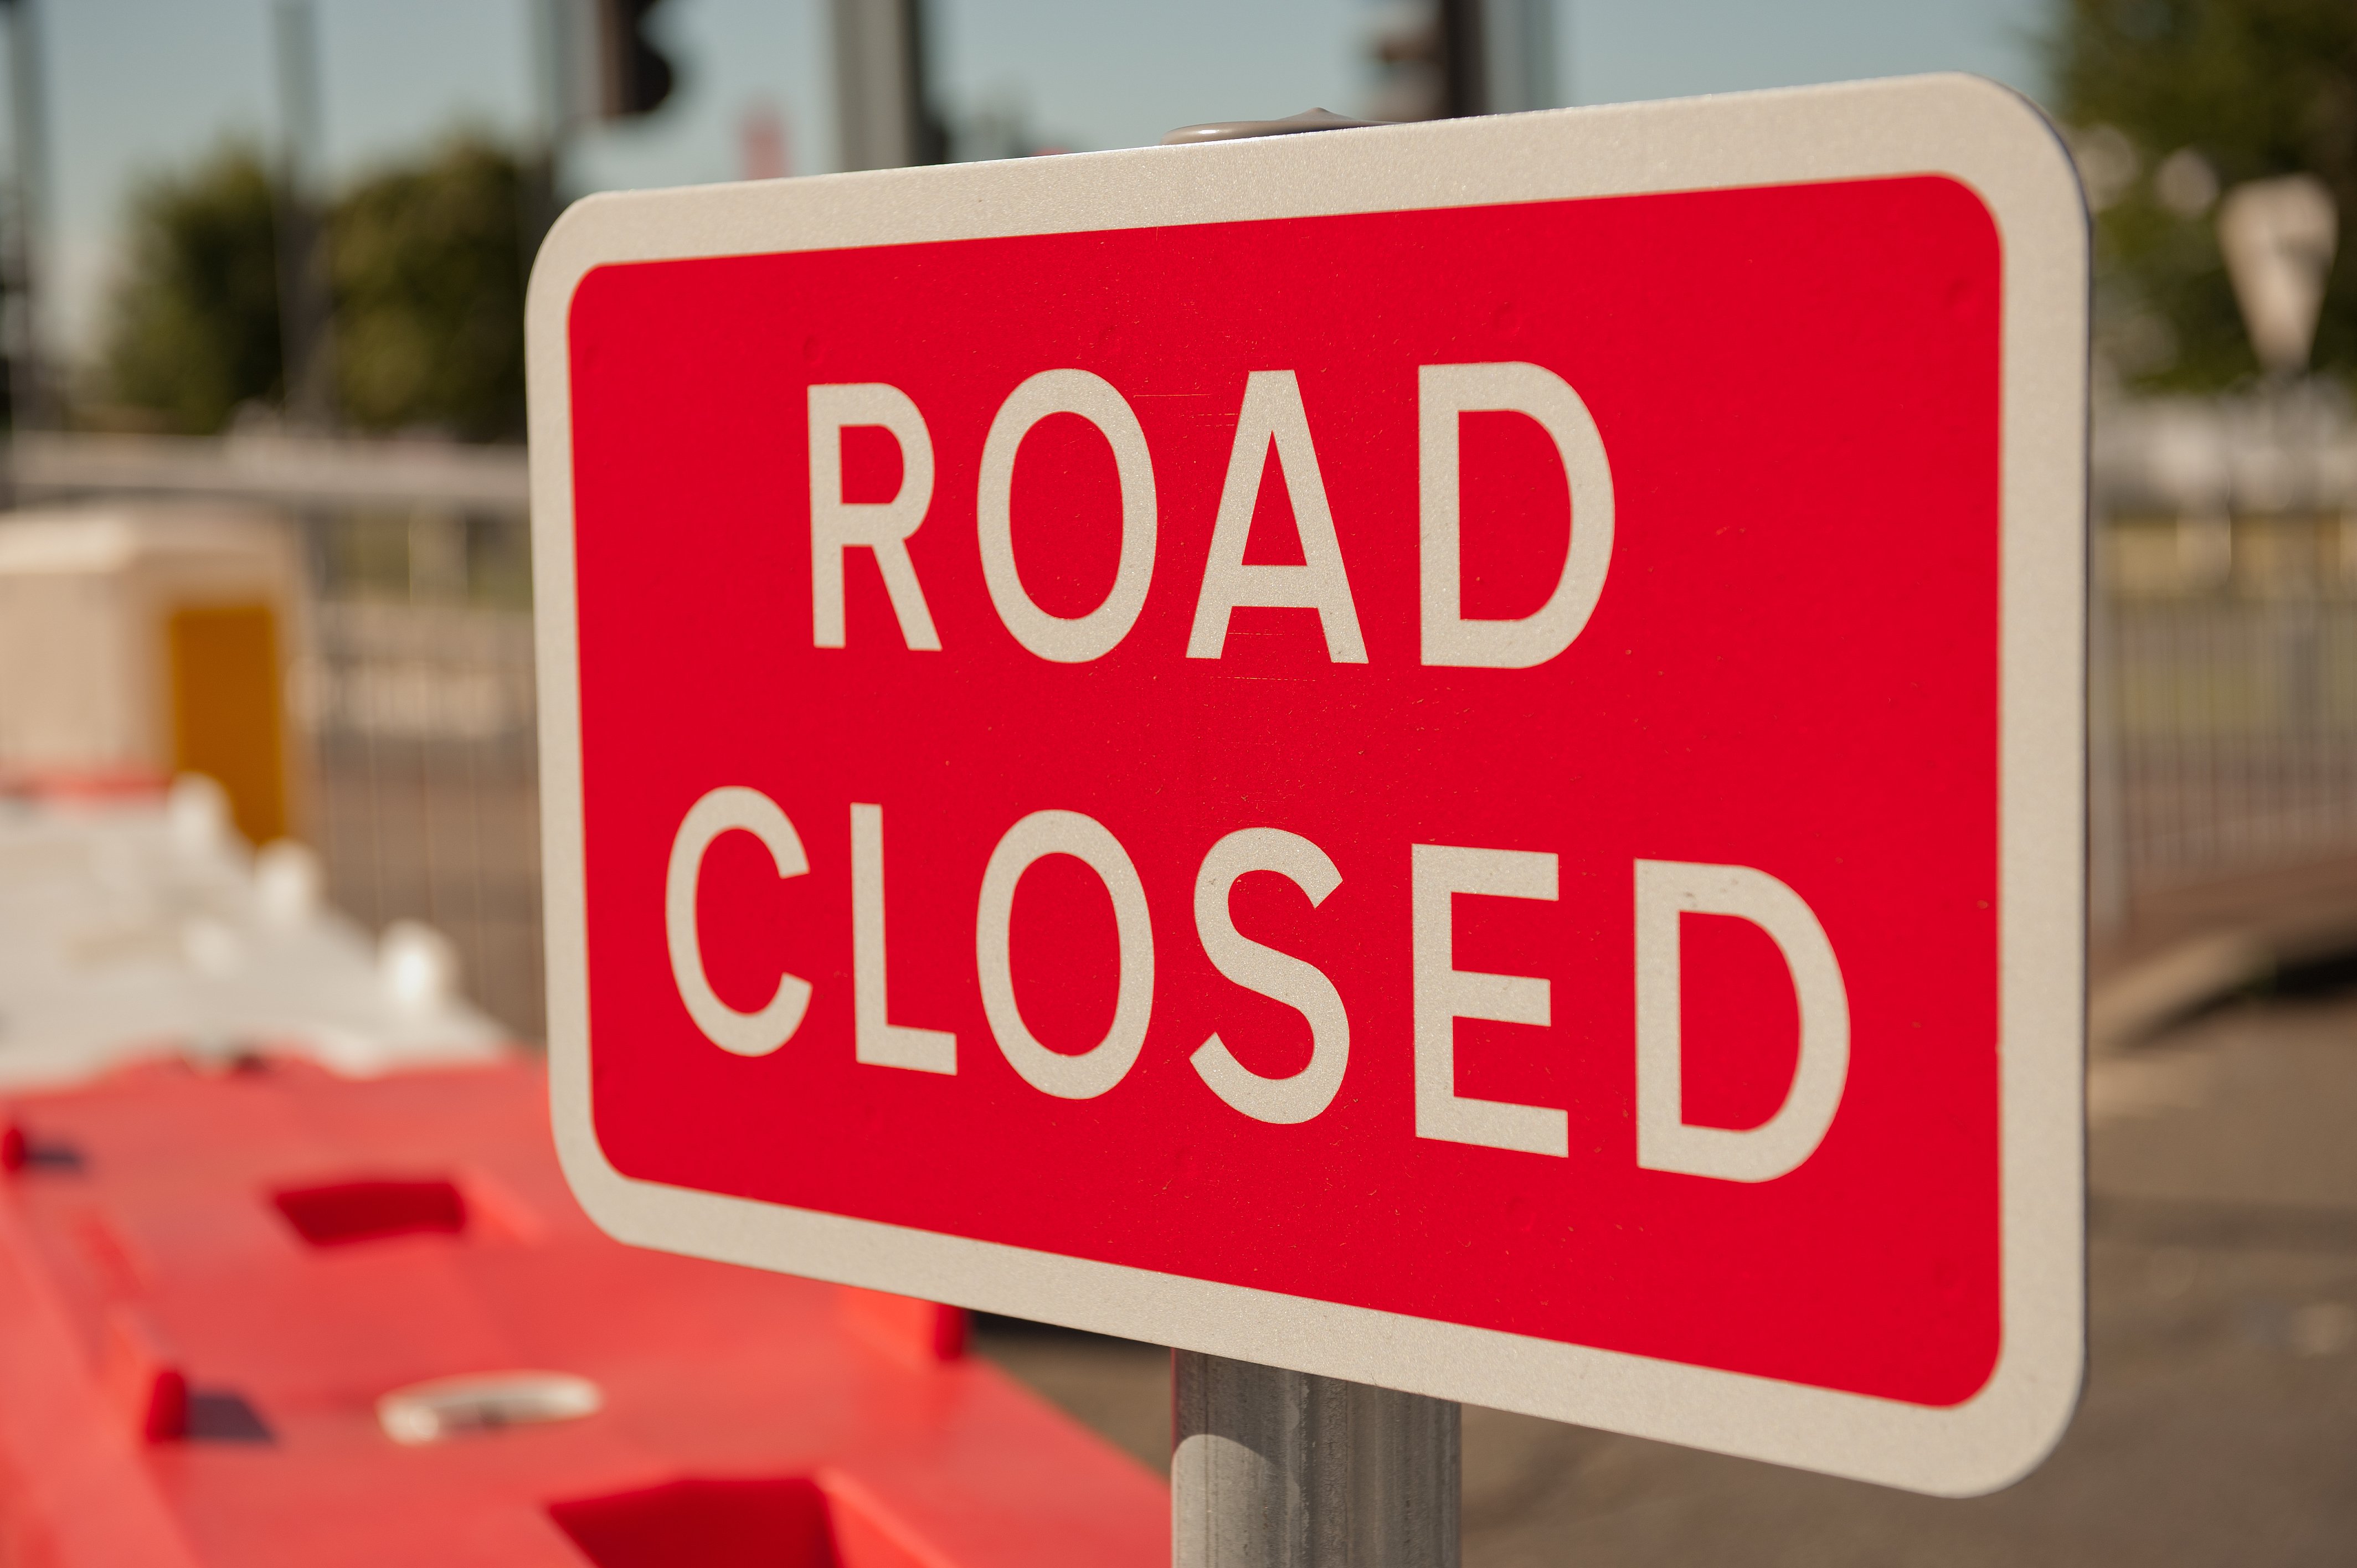 Image of road closed sign on a closed road